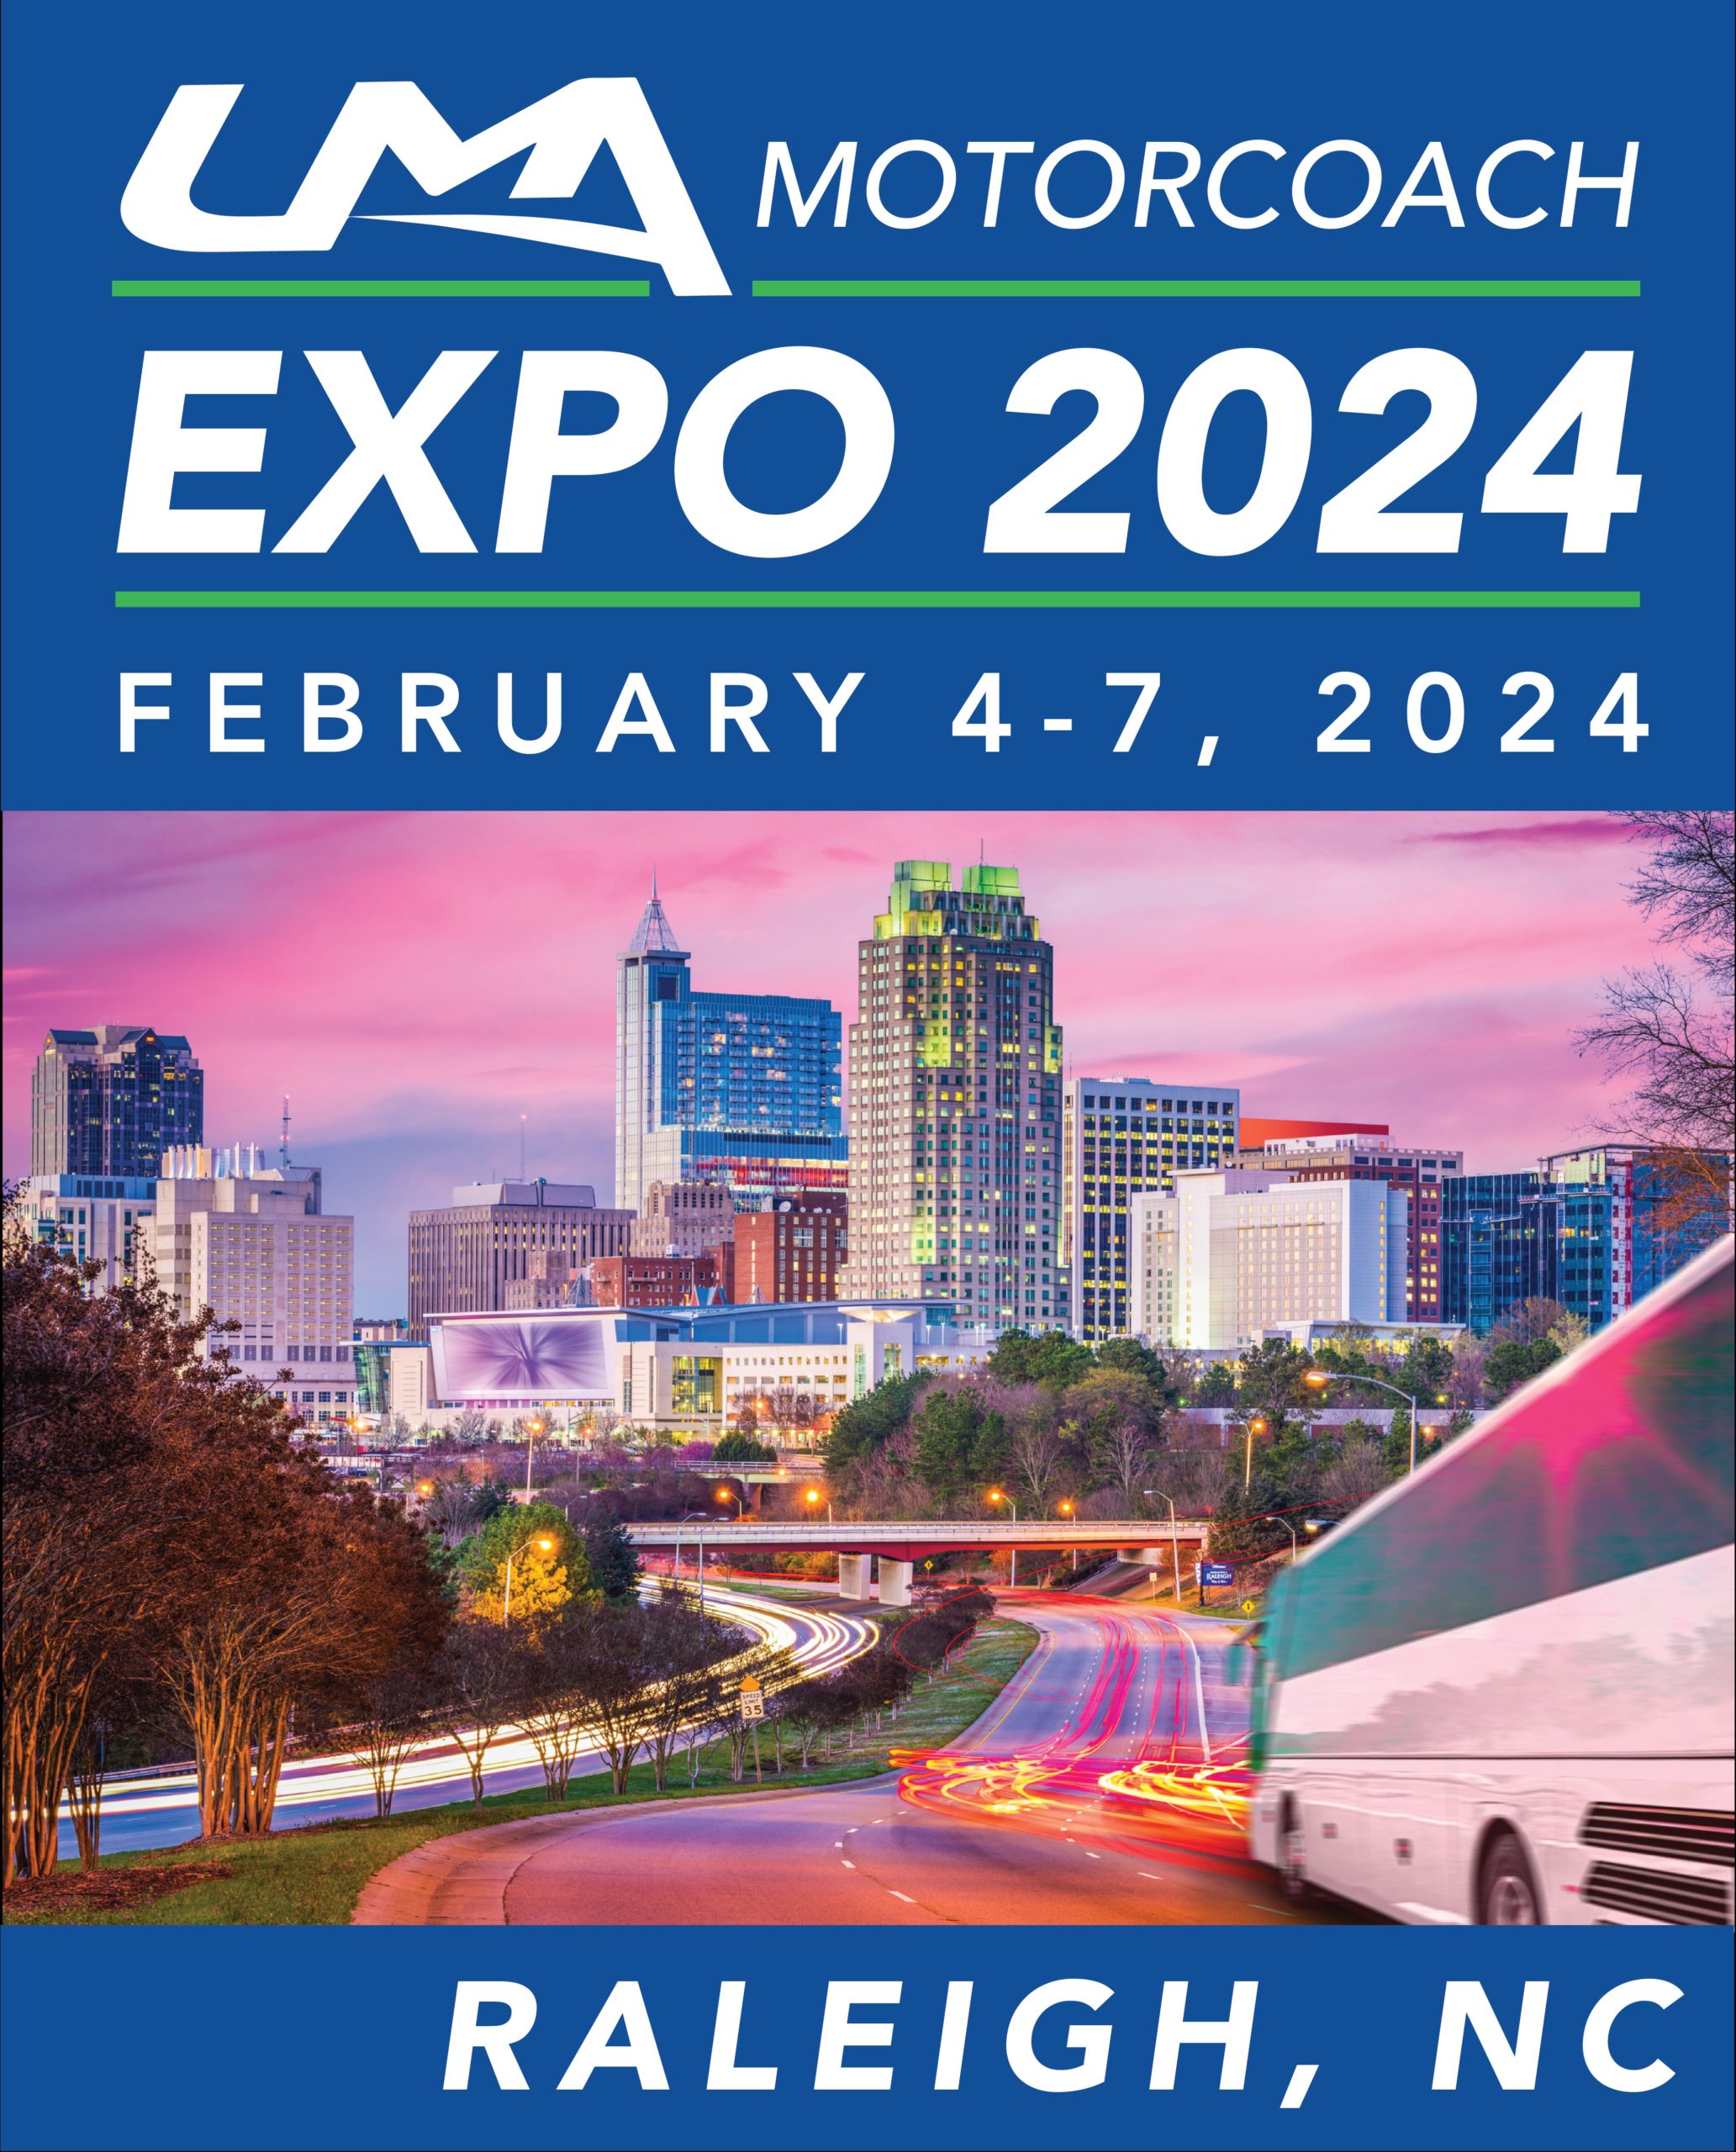 Join us at EXPO 2024 in Raleigh!